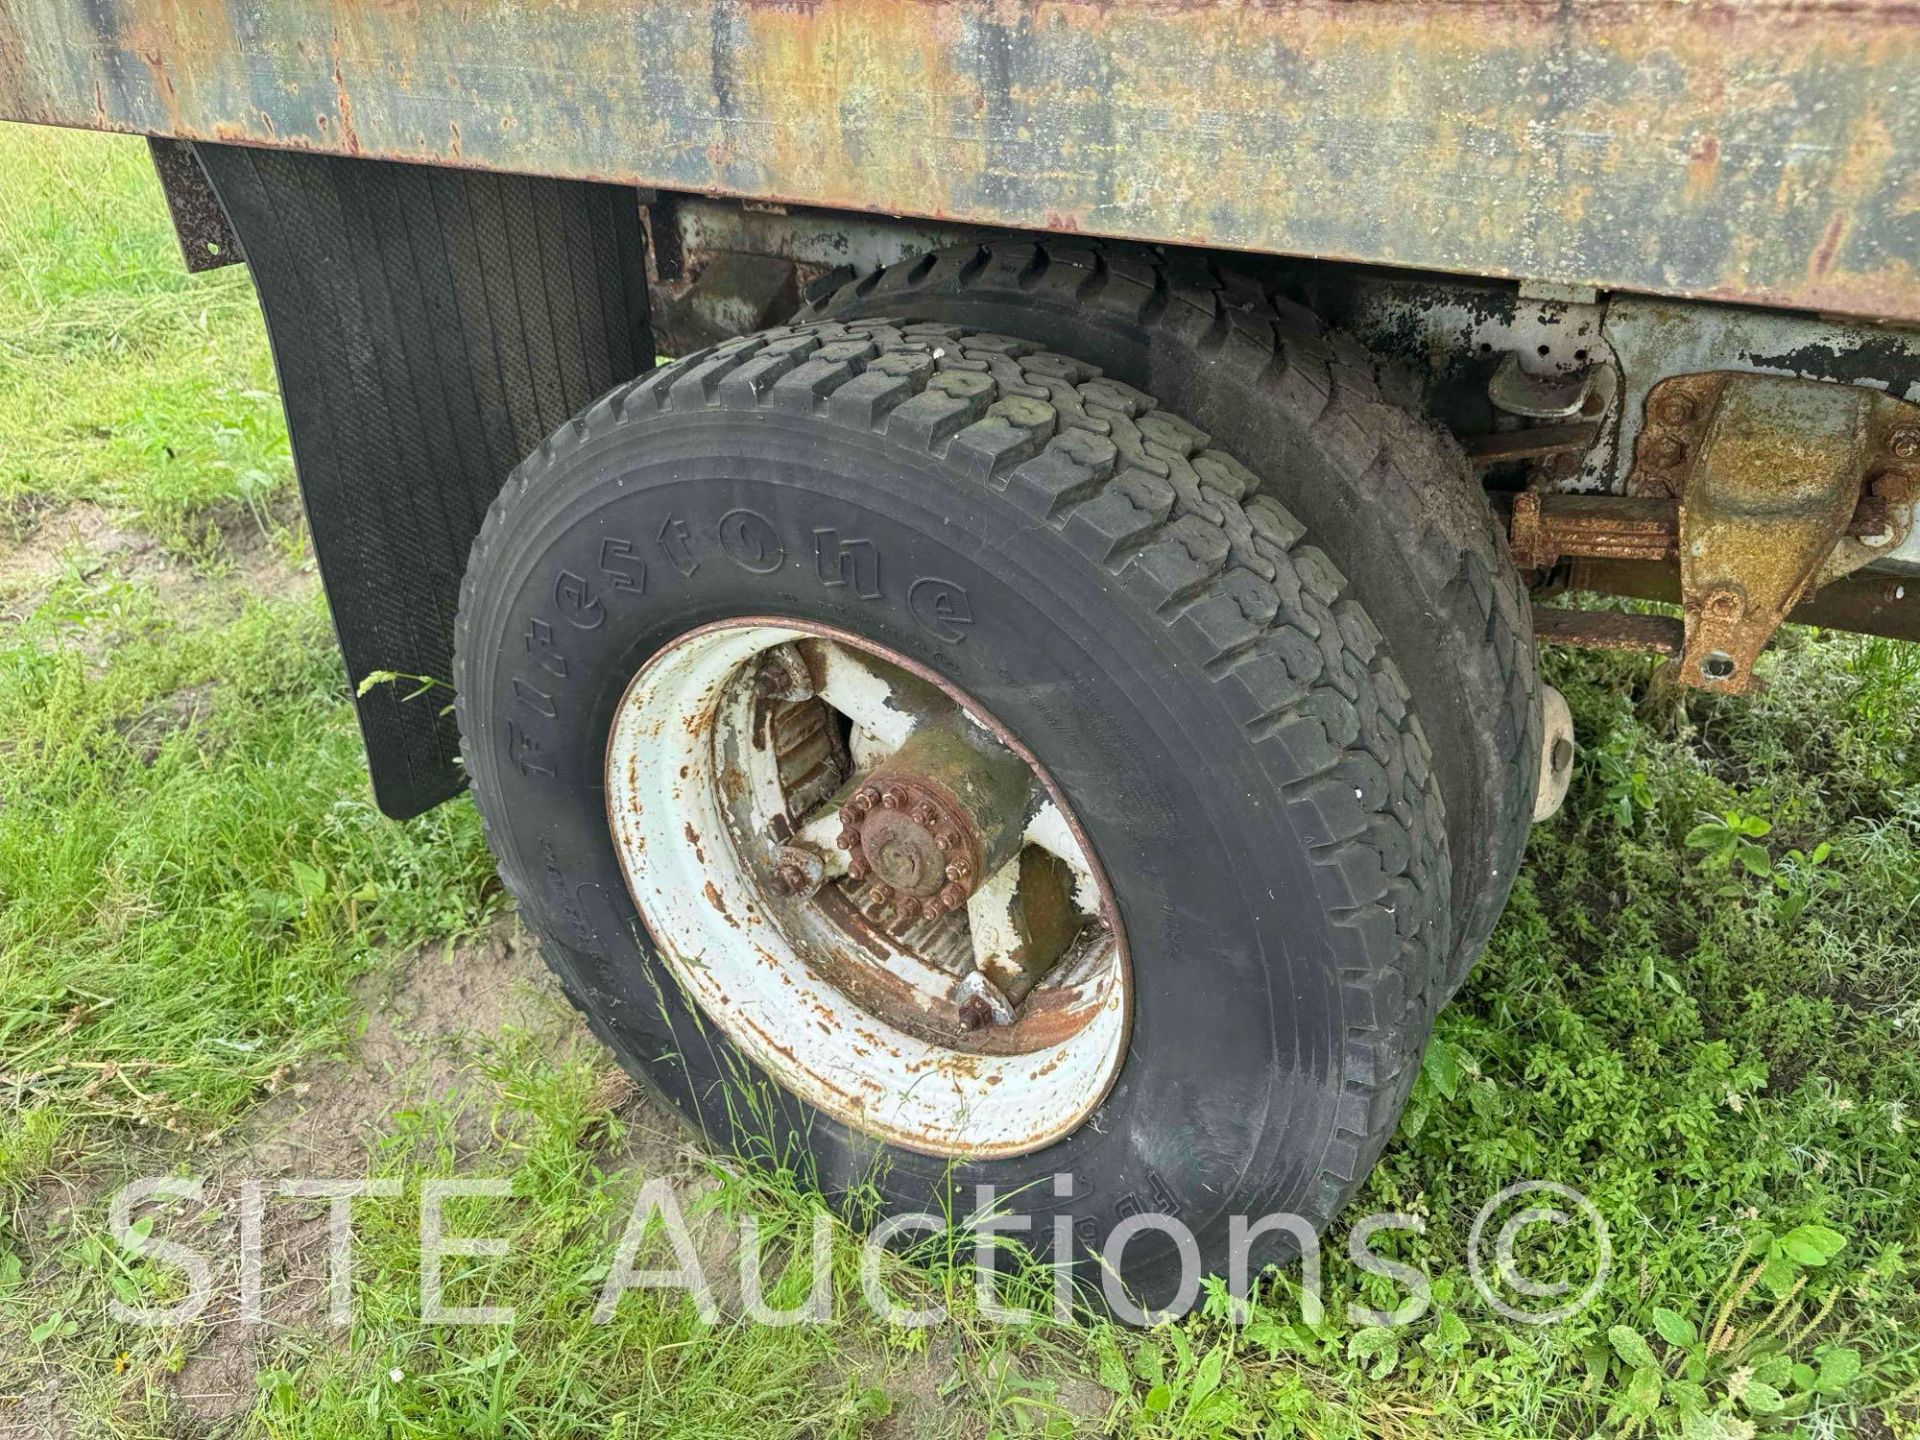 1996 Ford F700 S/A Dump Truck - Image 19 of 22